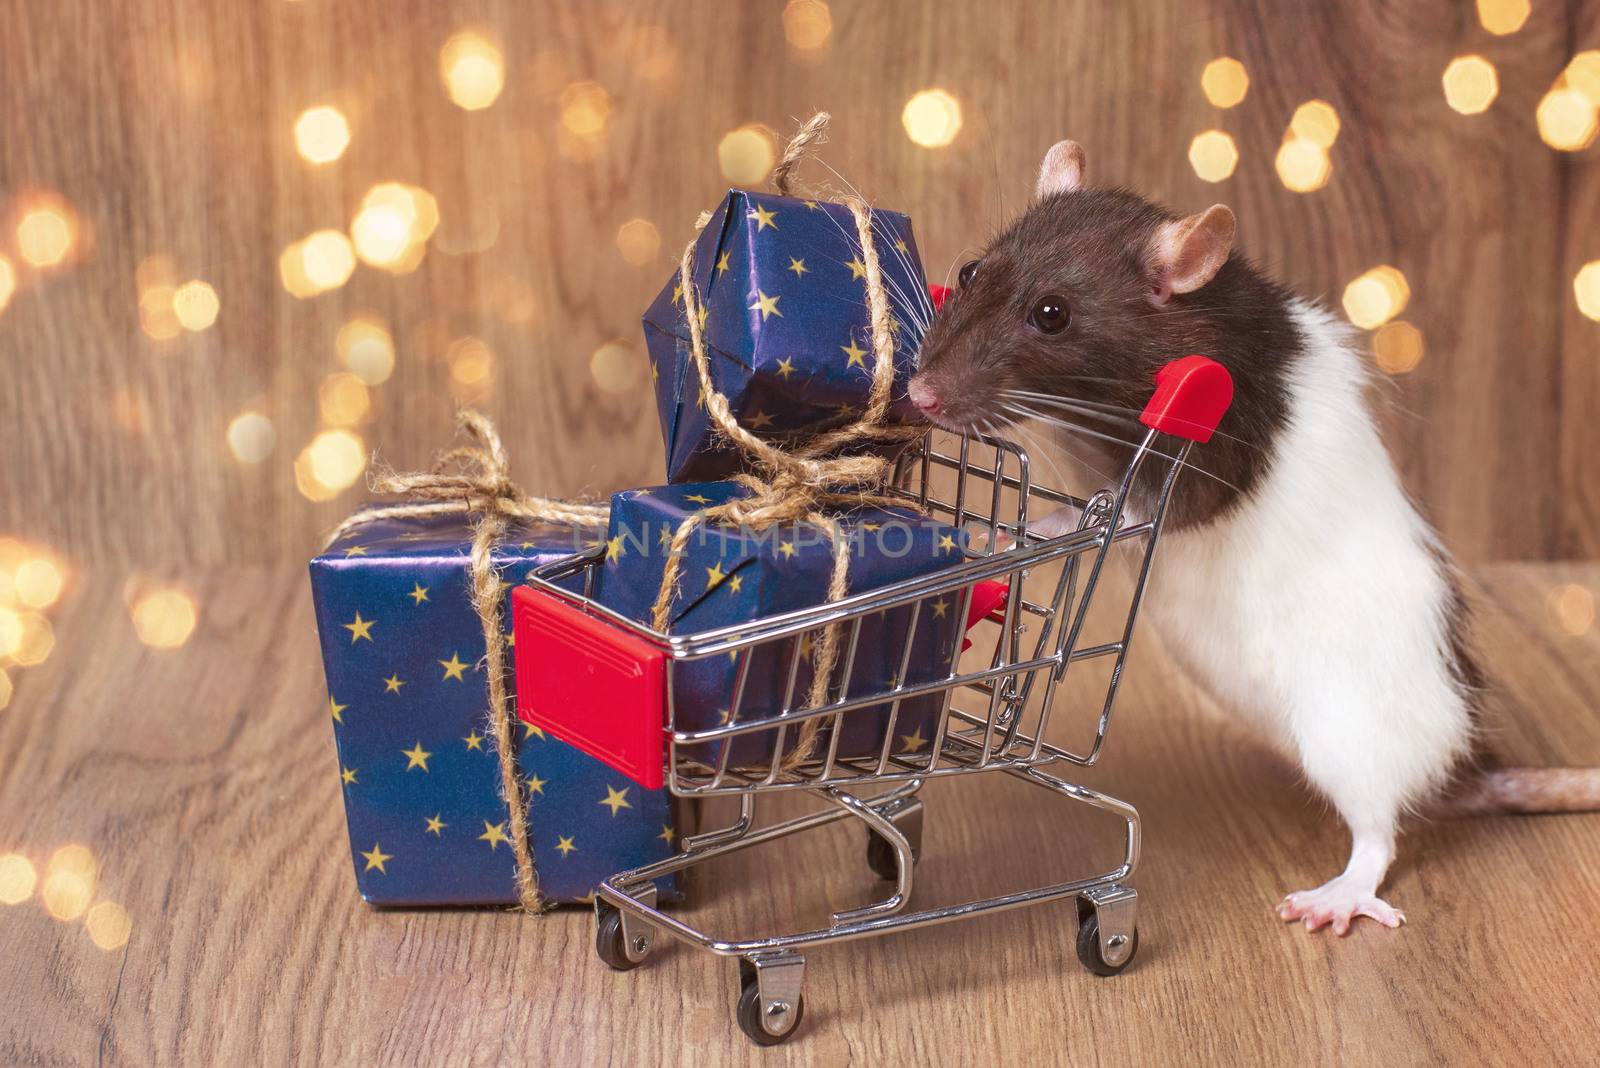 A Cute rat stands near a shopping cart with Christmas or New Year's gifts . New year shopping concept.Symbol of the year 2020. Year of the rat.